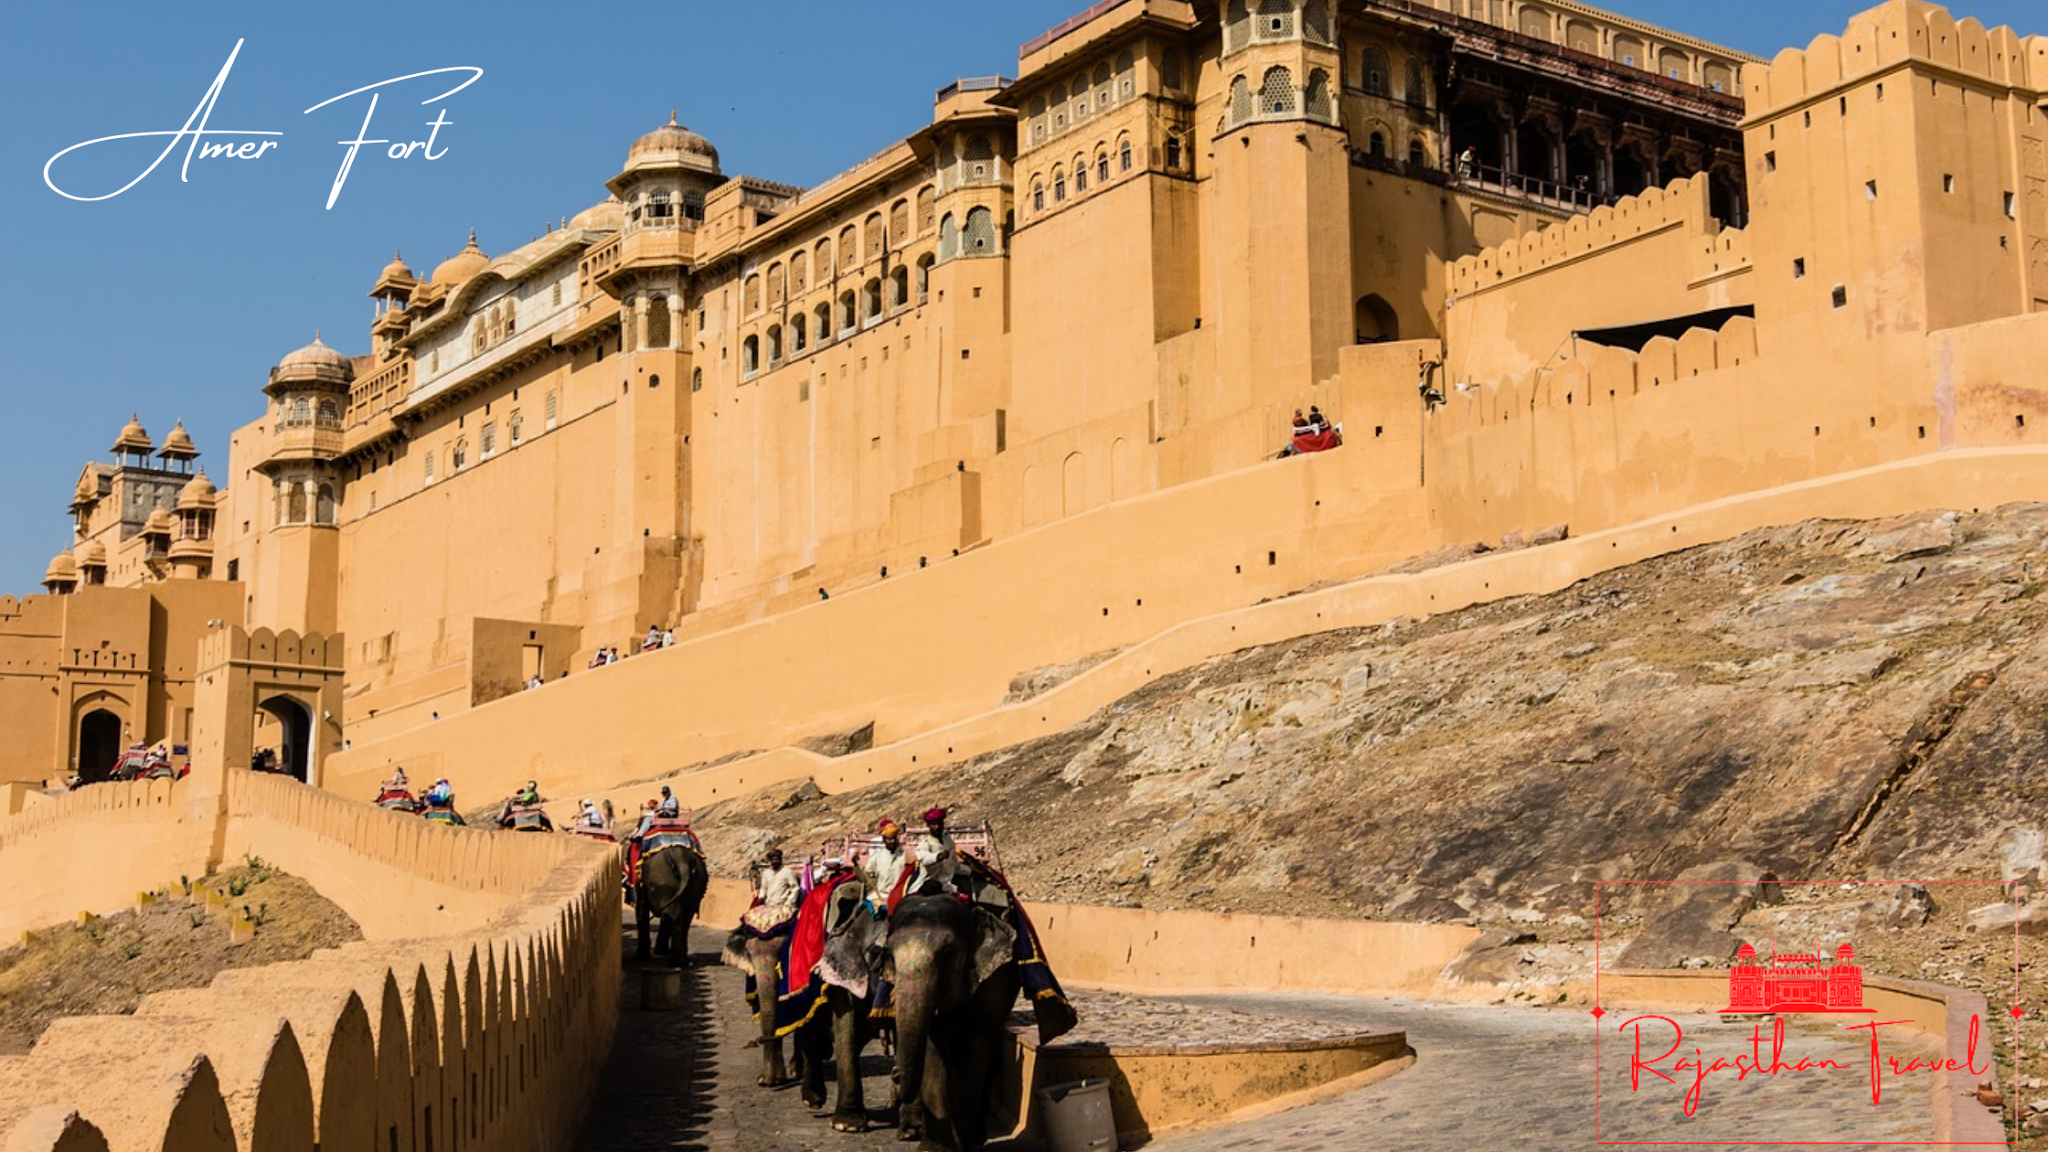 Explore the Historic Amer Fort in Jaipur, Rajasthan